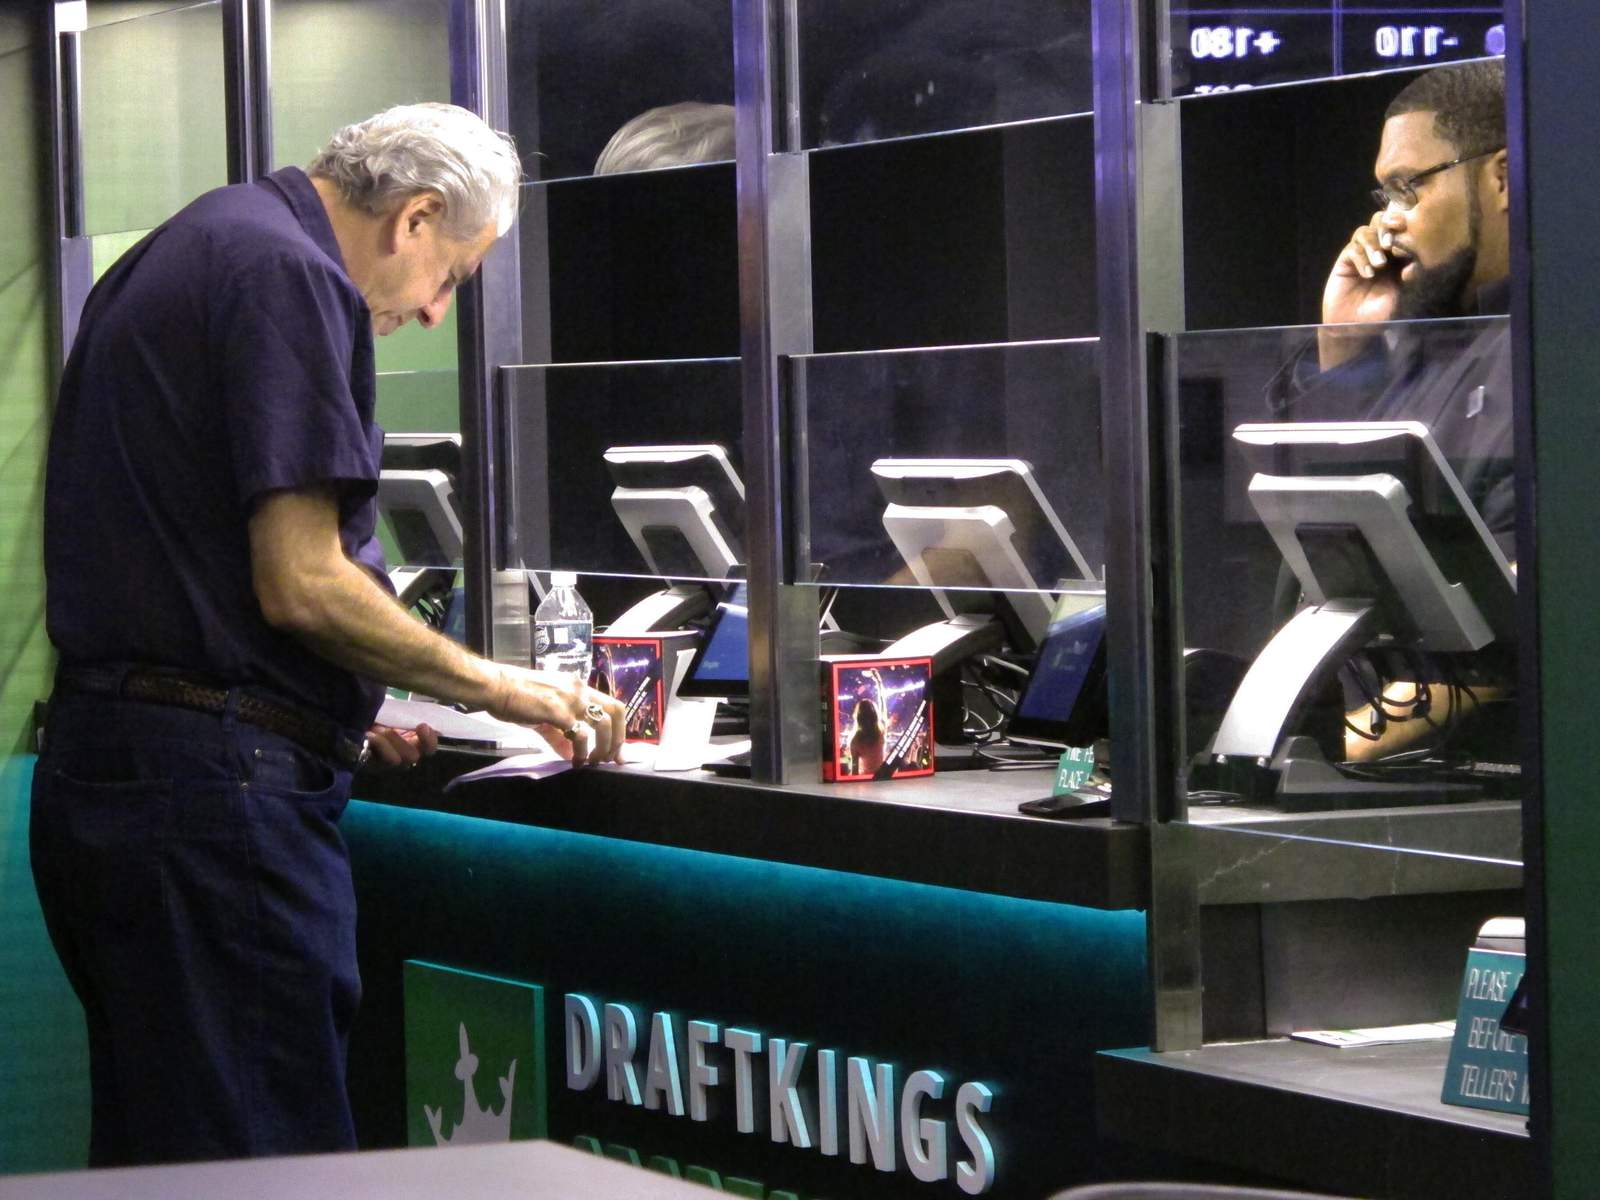 DraftKings buys VSiN sports betting video broadcast company